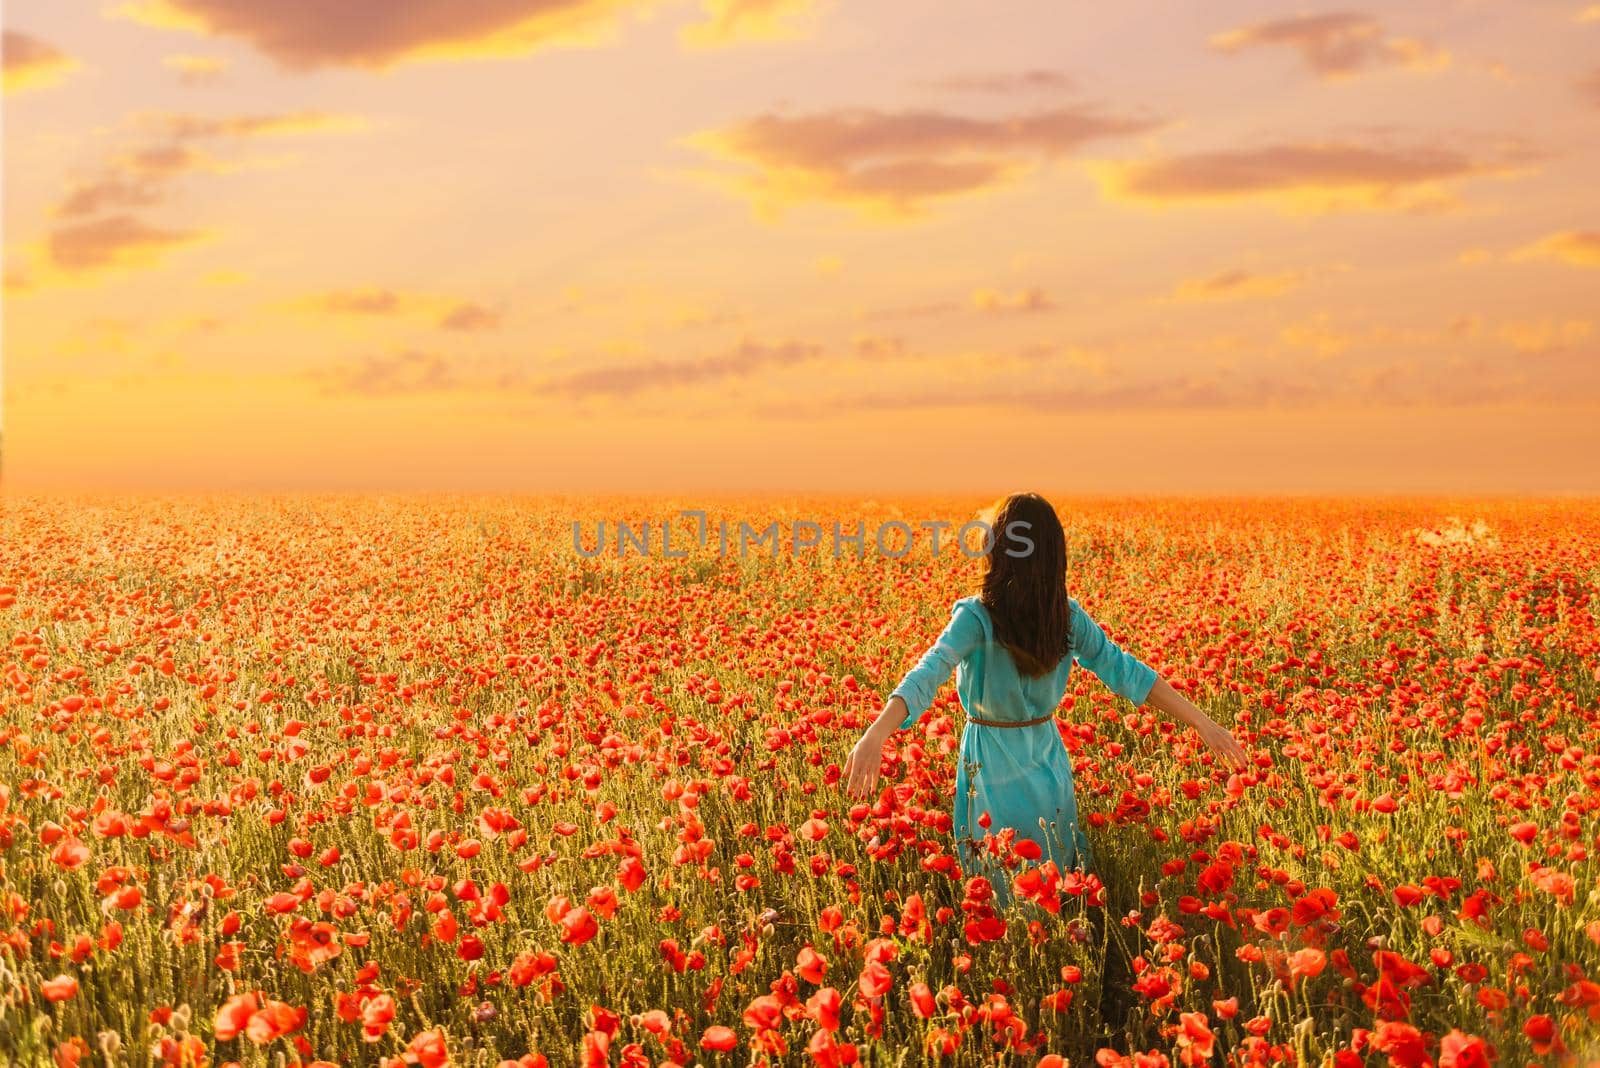 Young woman wearing in blue dress walking in red poppies meadow at sunset.